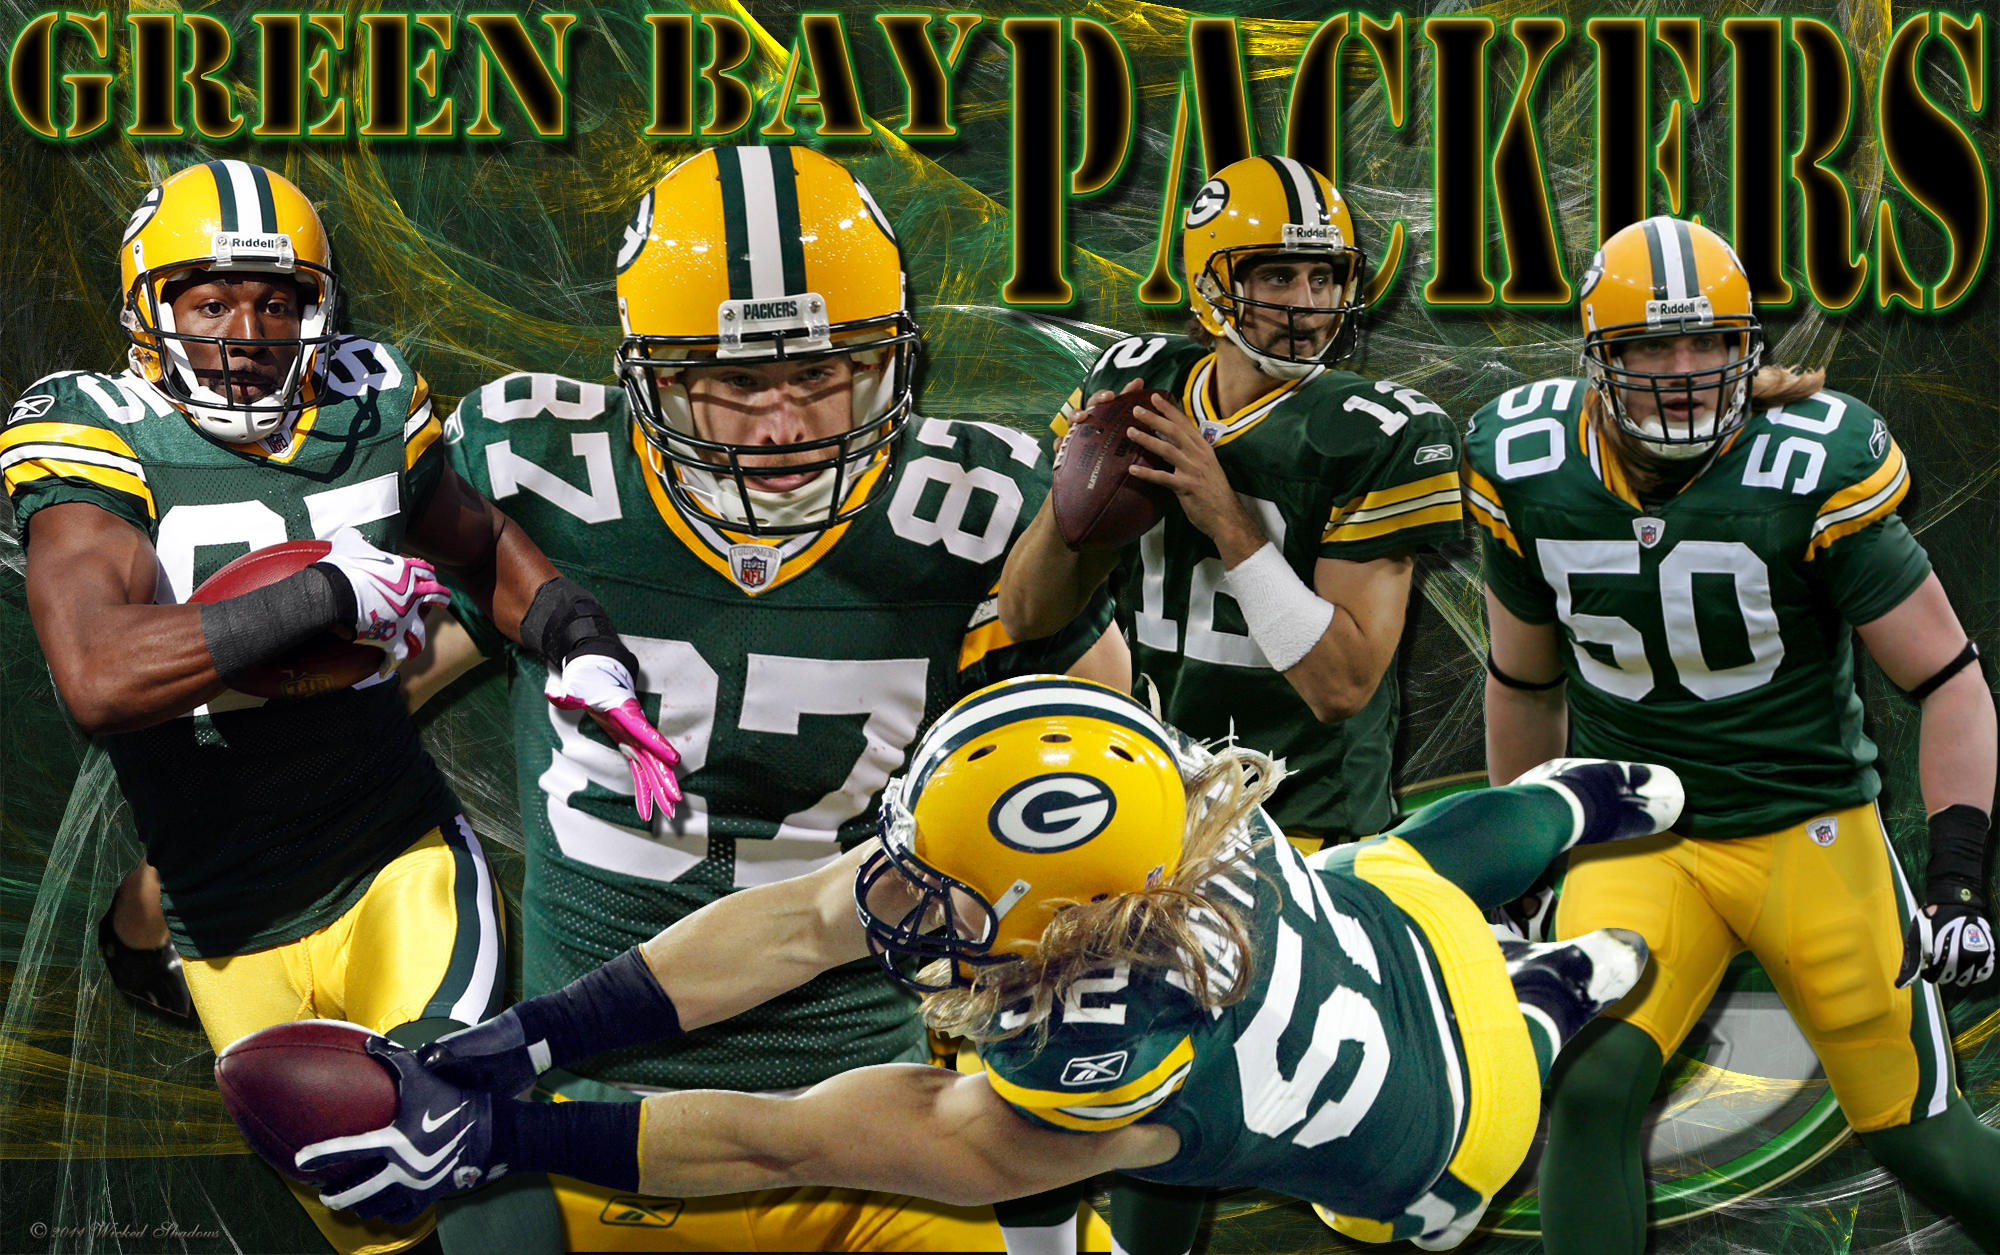 Green Bay Packers Images.